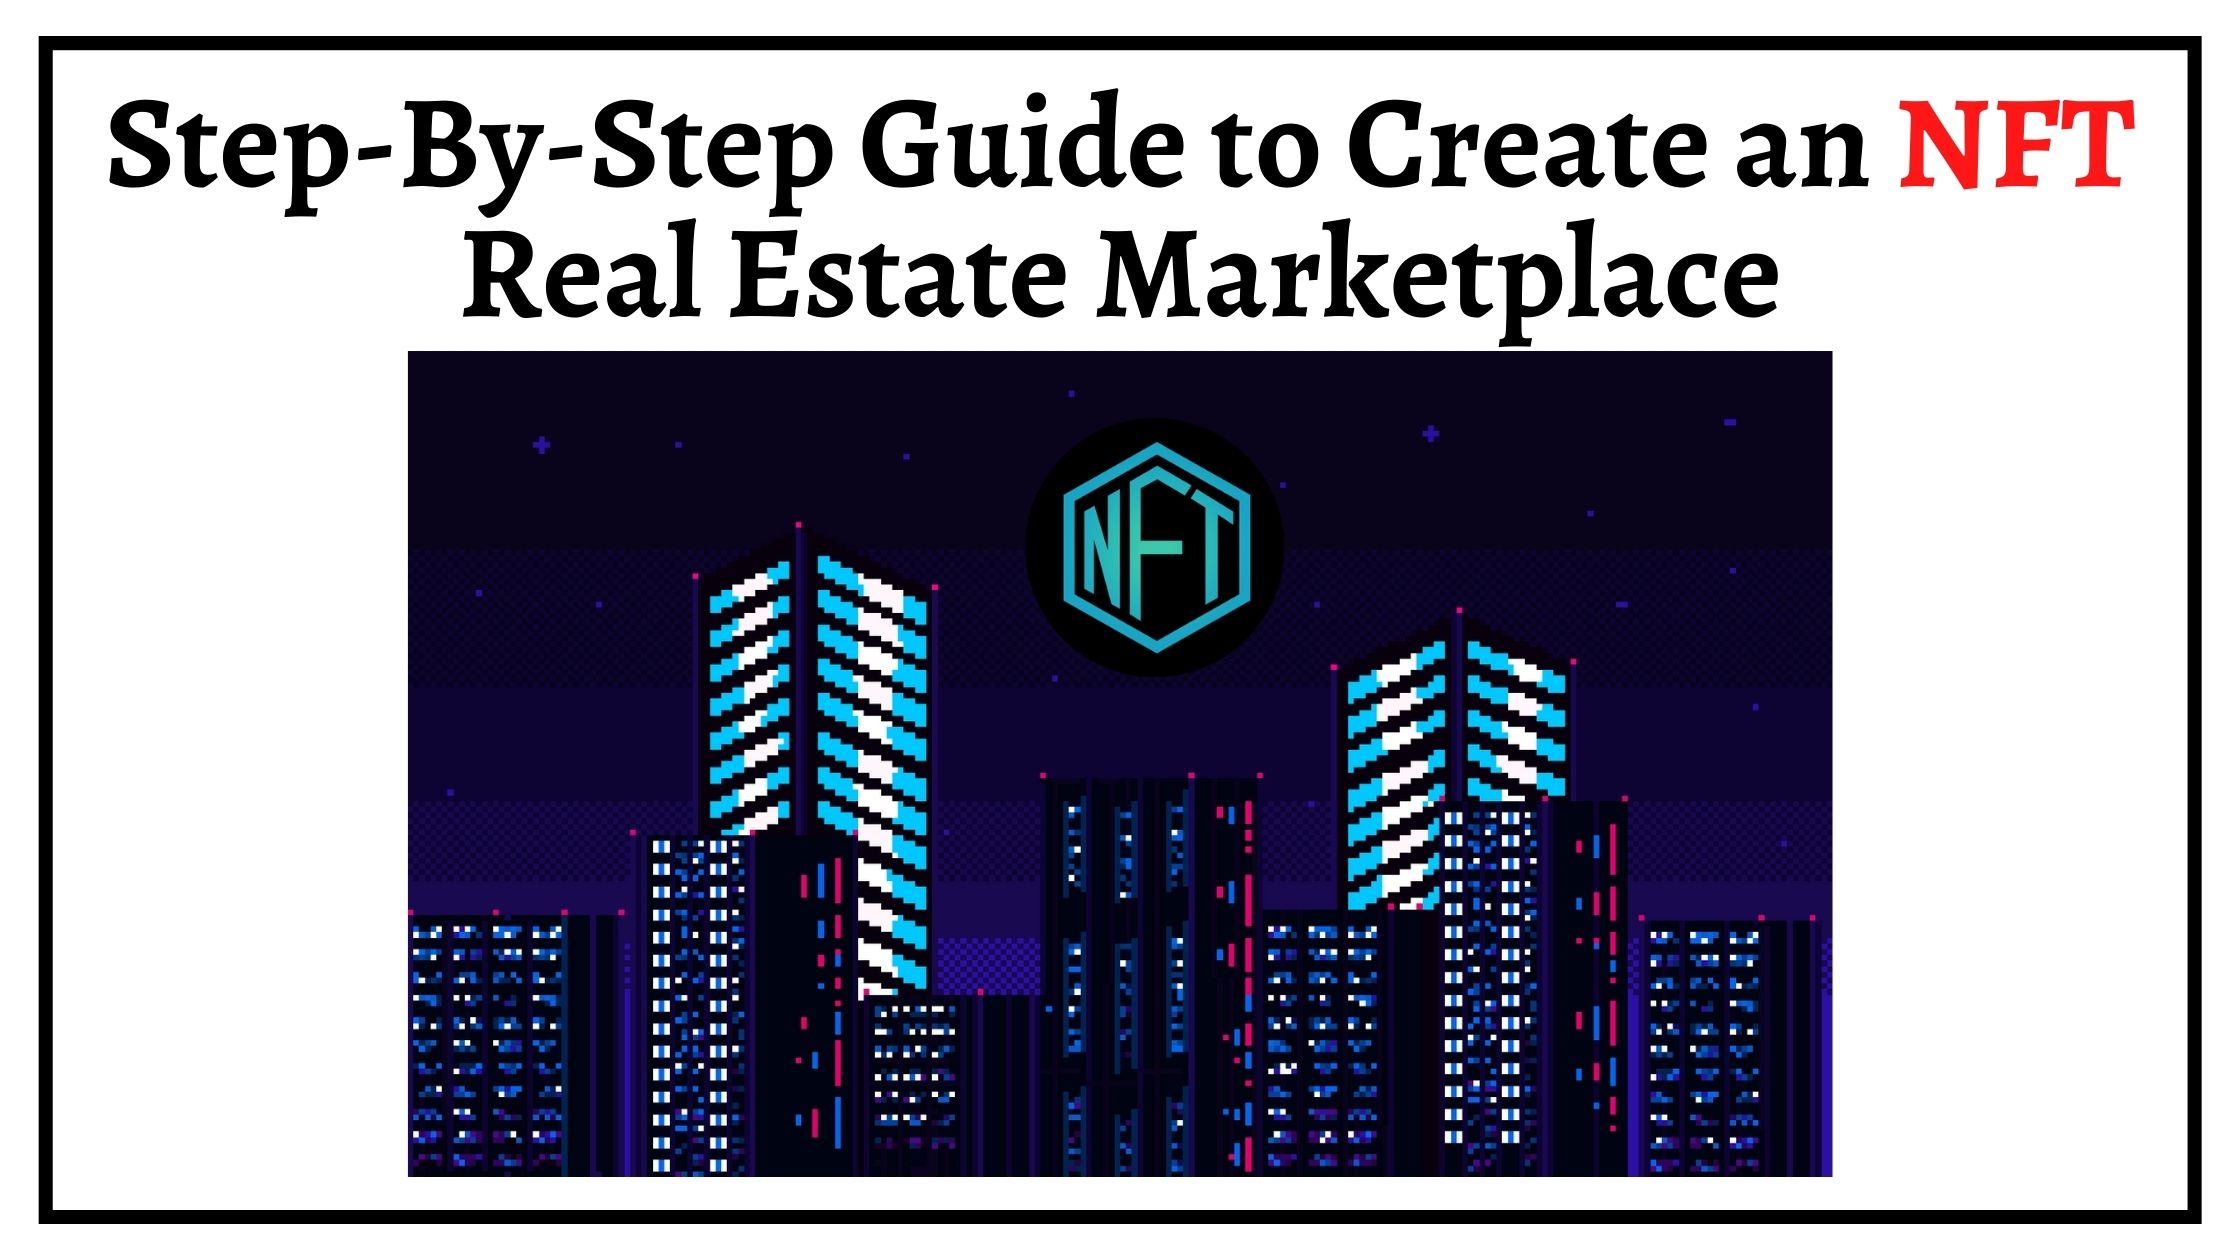 Step-By-Step Guide to Create an NFT Real Estate Marketplace